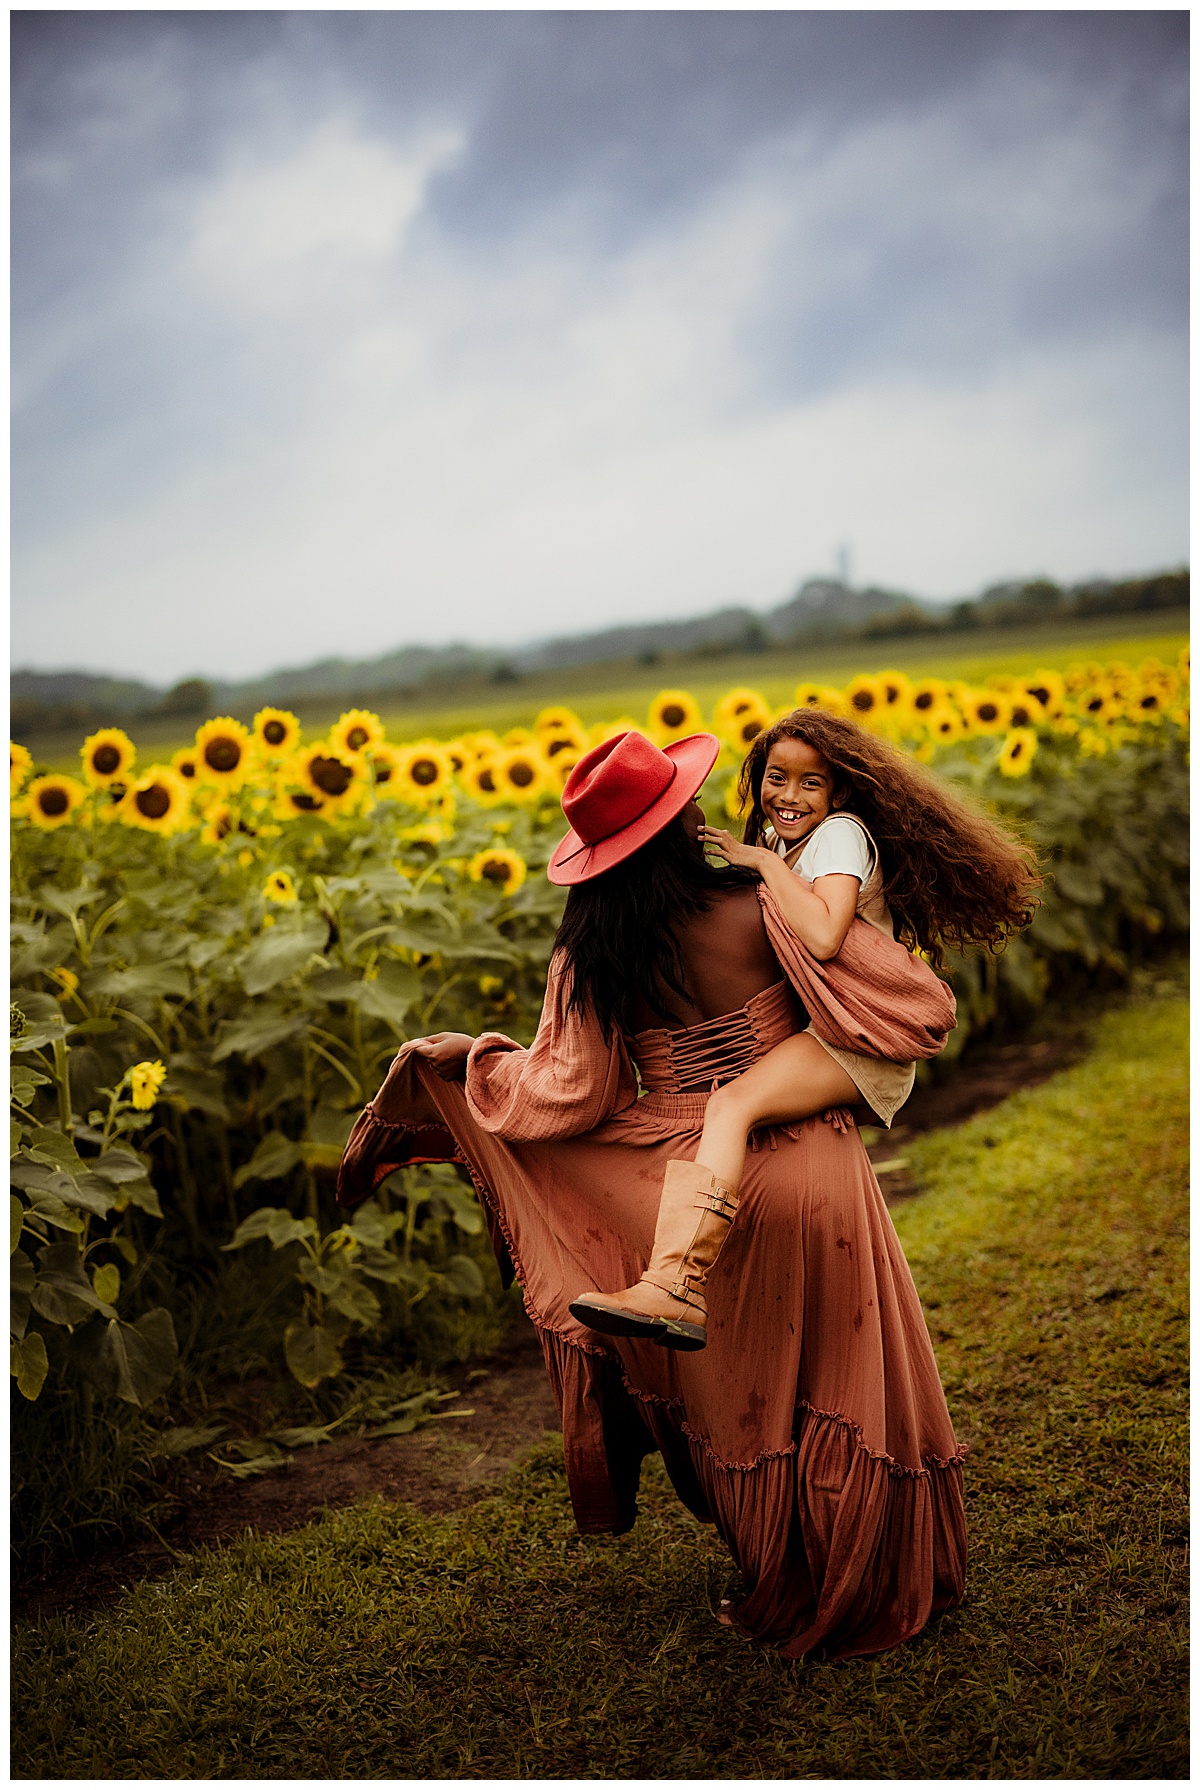 Mom and daughter walk together during their sunflower photoshoot